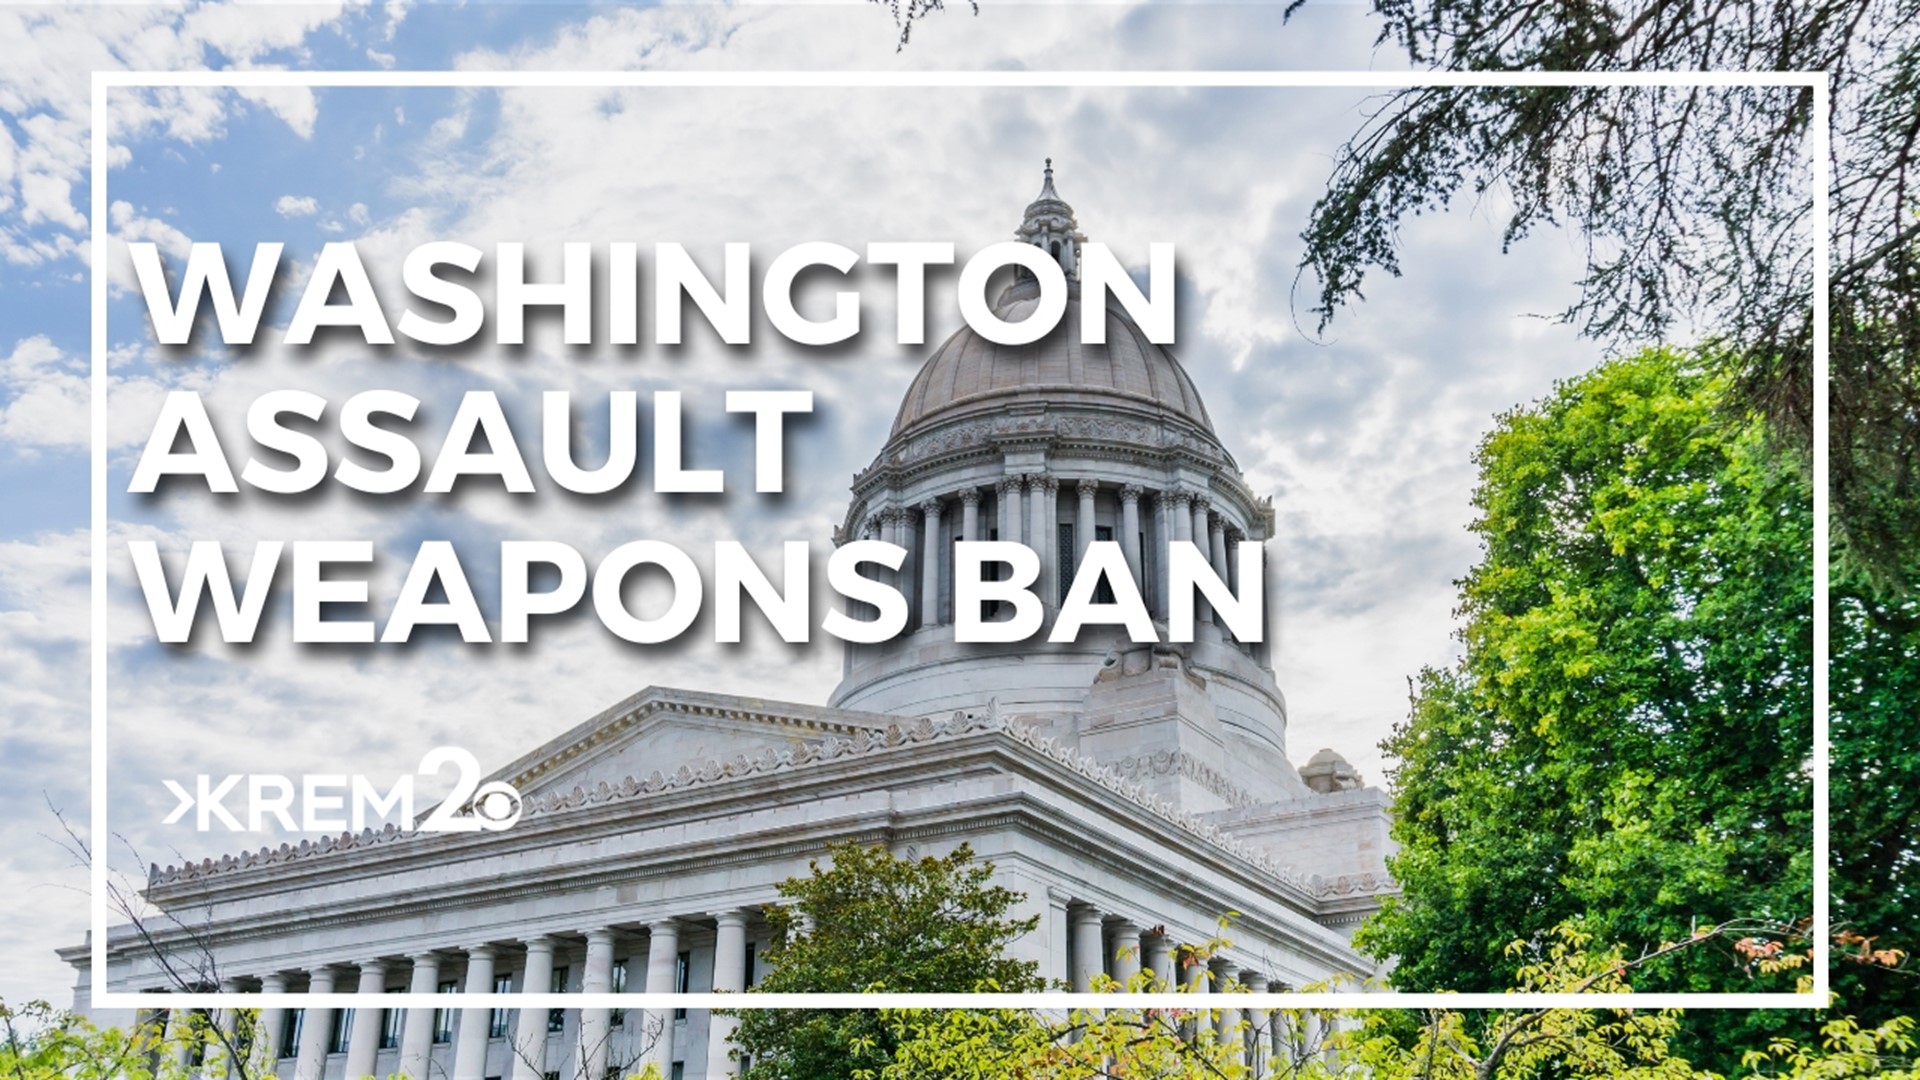 This is the first time a bill like this has made it through a chamber of the Washington state legislature.